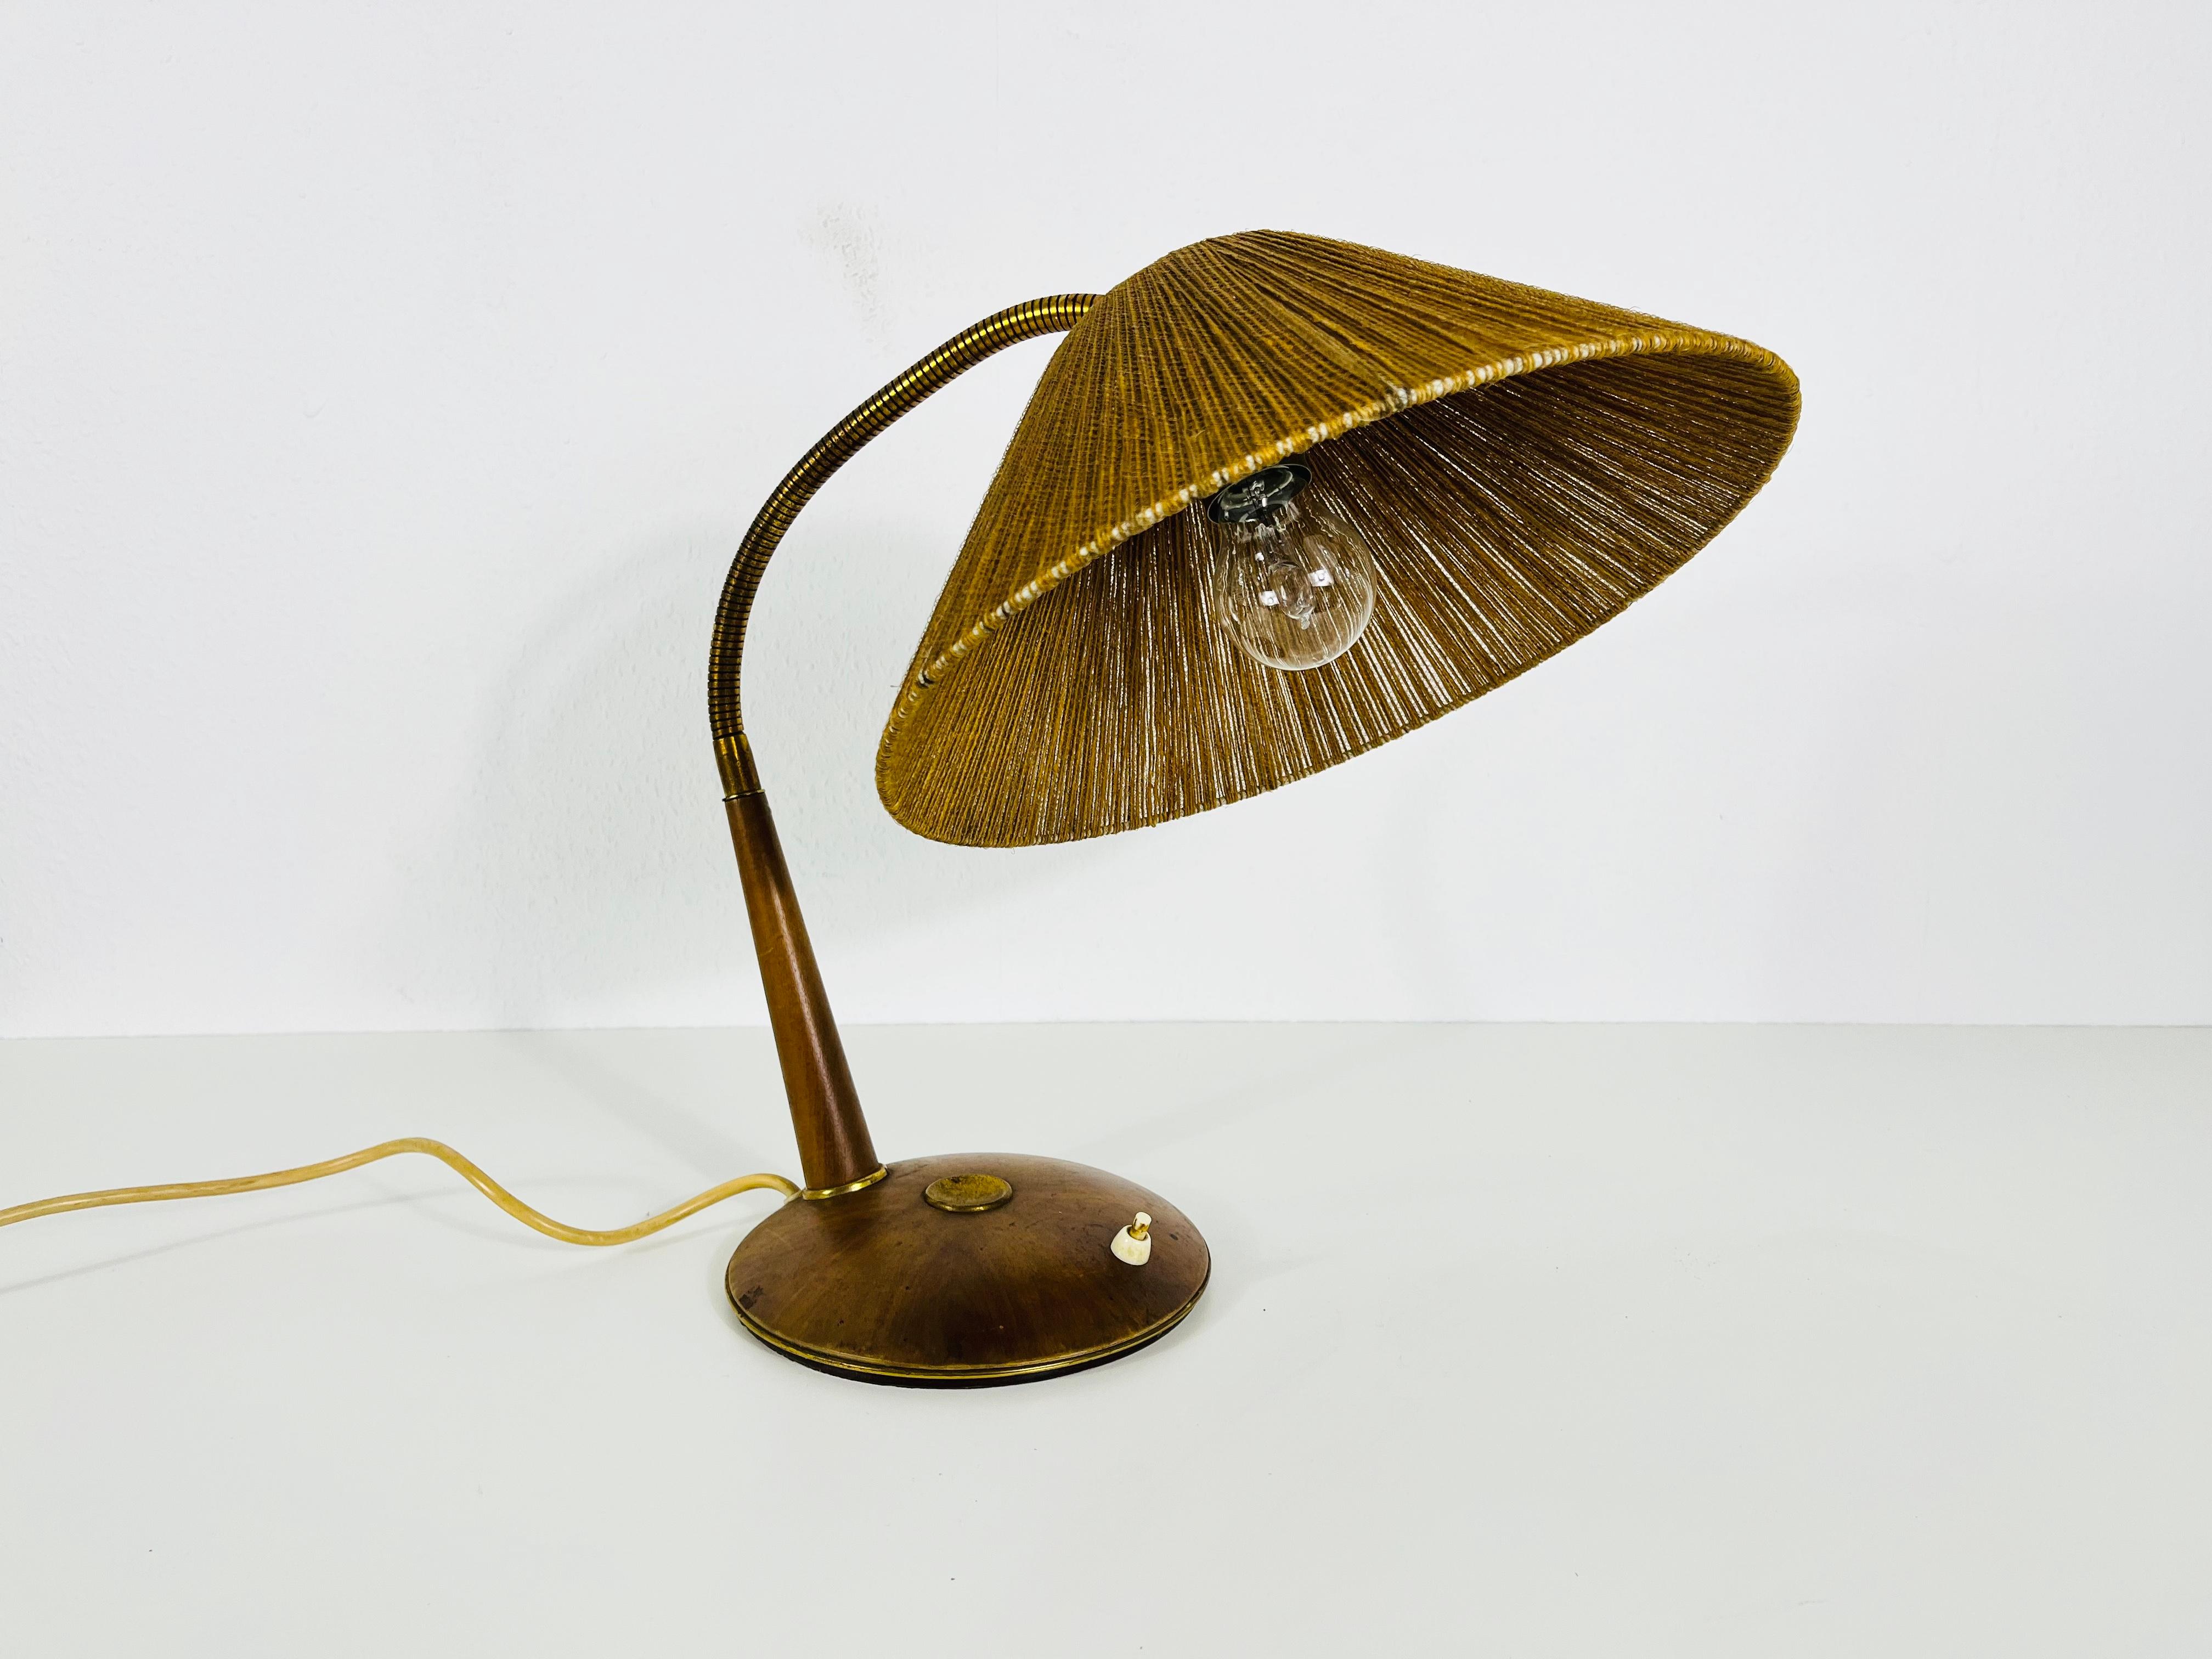 A wonderful teak table lamp made in the 1960s by Temde in Switzerland. It is fascinating with its rare lamp shade.

Measures:

Height: max height: 70 cm
Shade dia: 32 cm
Base dia: 20 cm

The light requires one E27 (US E26) light bulb. Good